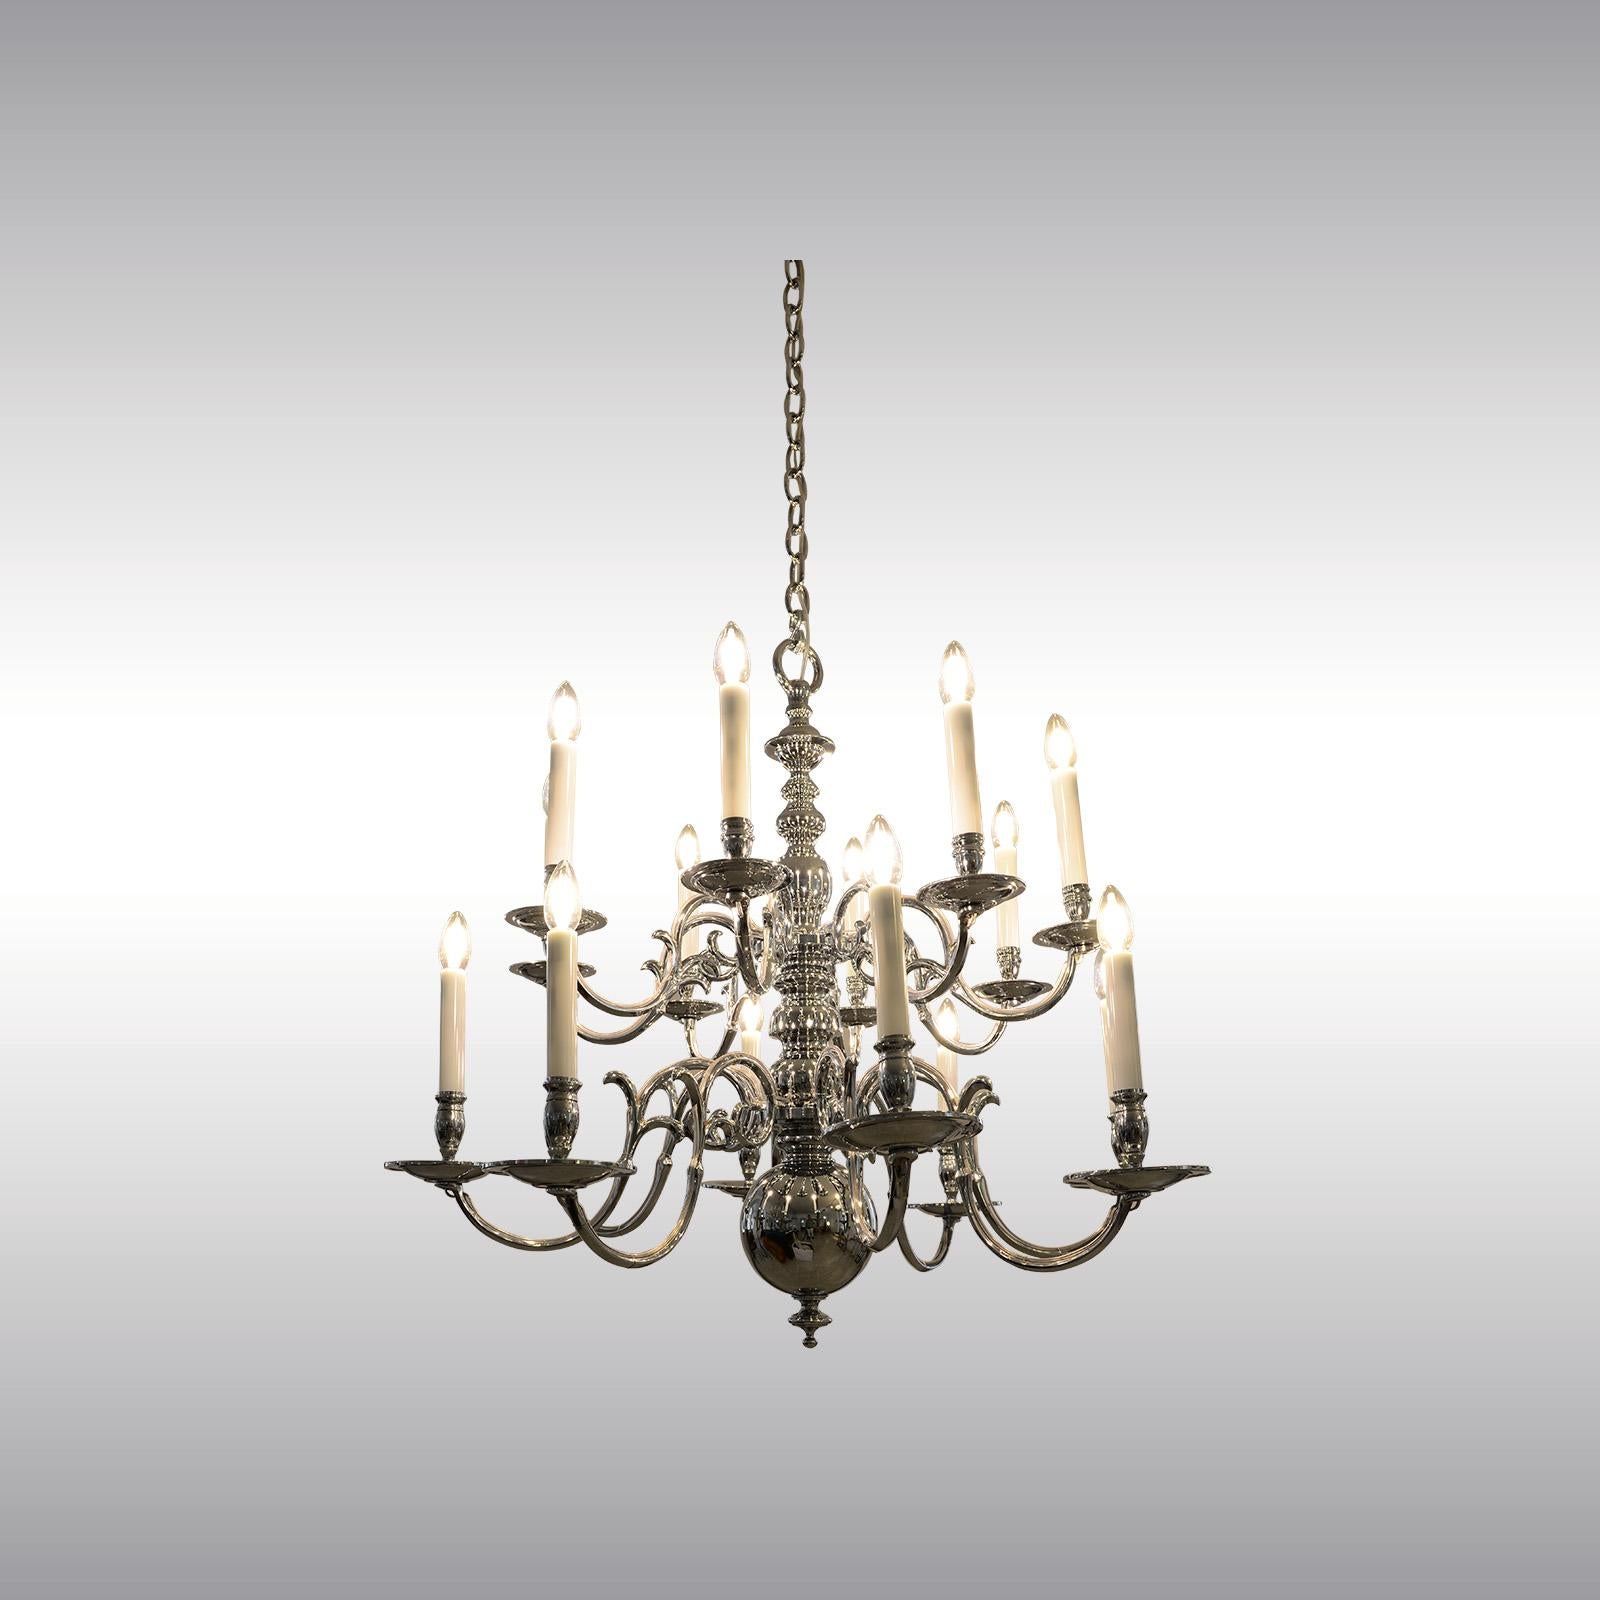 Hand-Crafted Original 1920 Austro Hungary Baroque-Flemish Style Chandelier, Chrome Plated